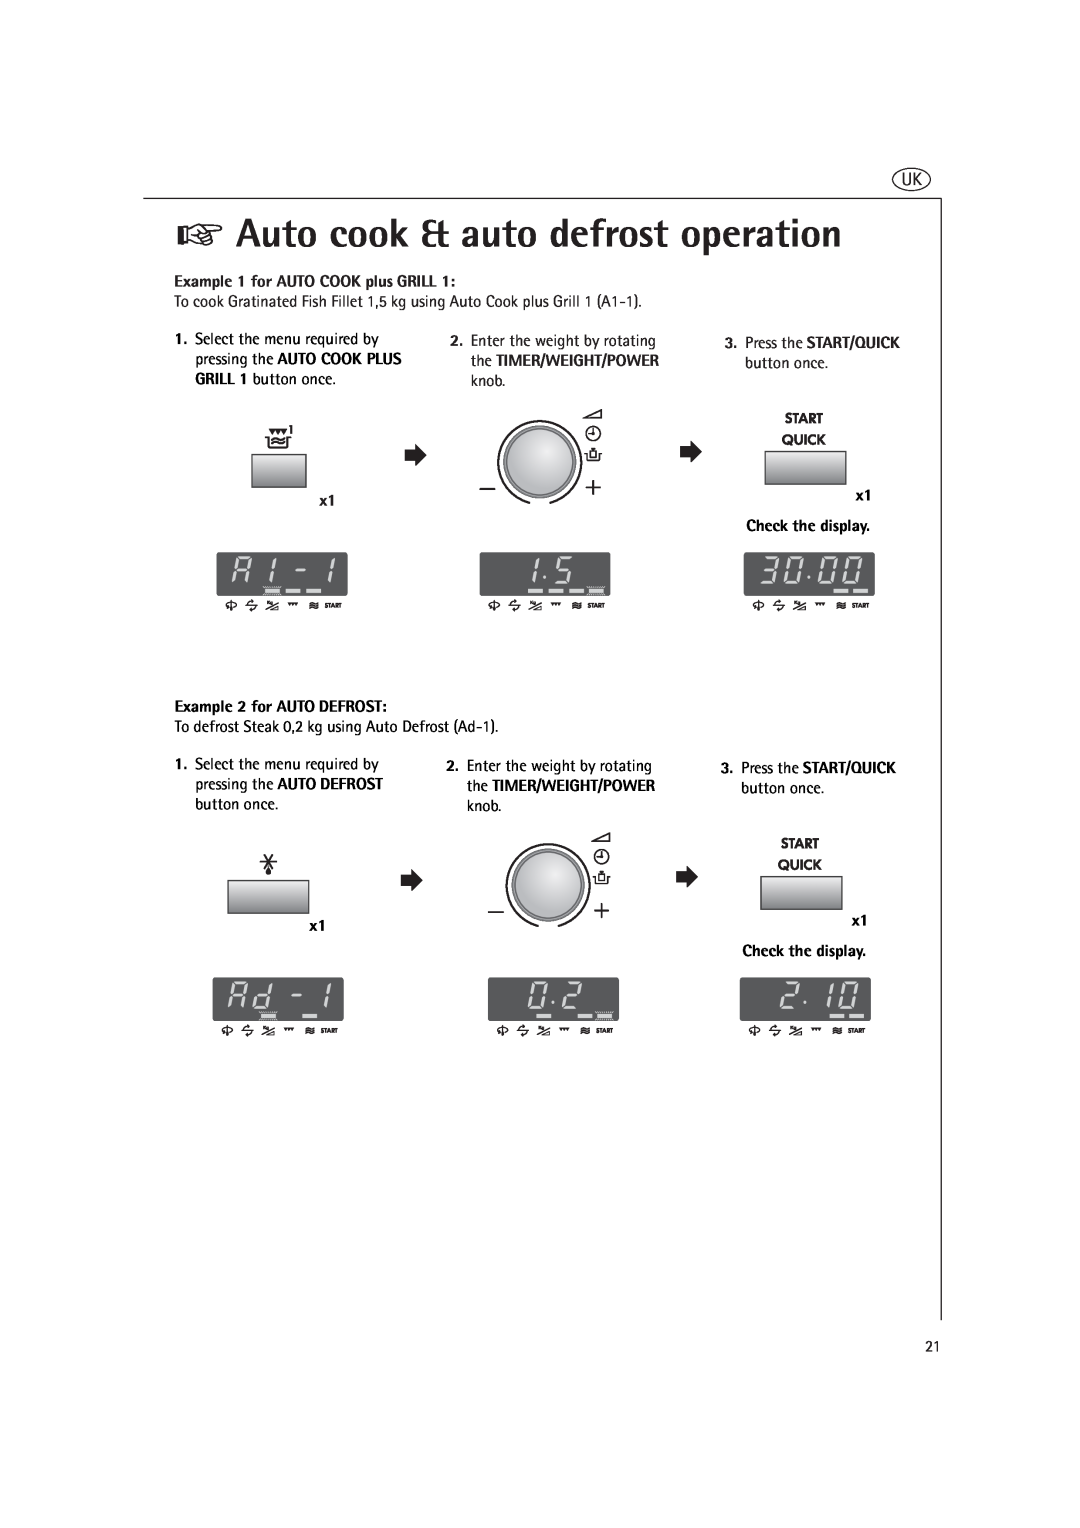 AEG MCD2660E Auto cook & auto defrost operation, Example 1 for AUTO COOK plus GRILL, knob, Enter the weight by rotating 